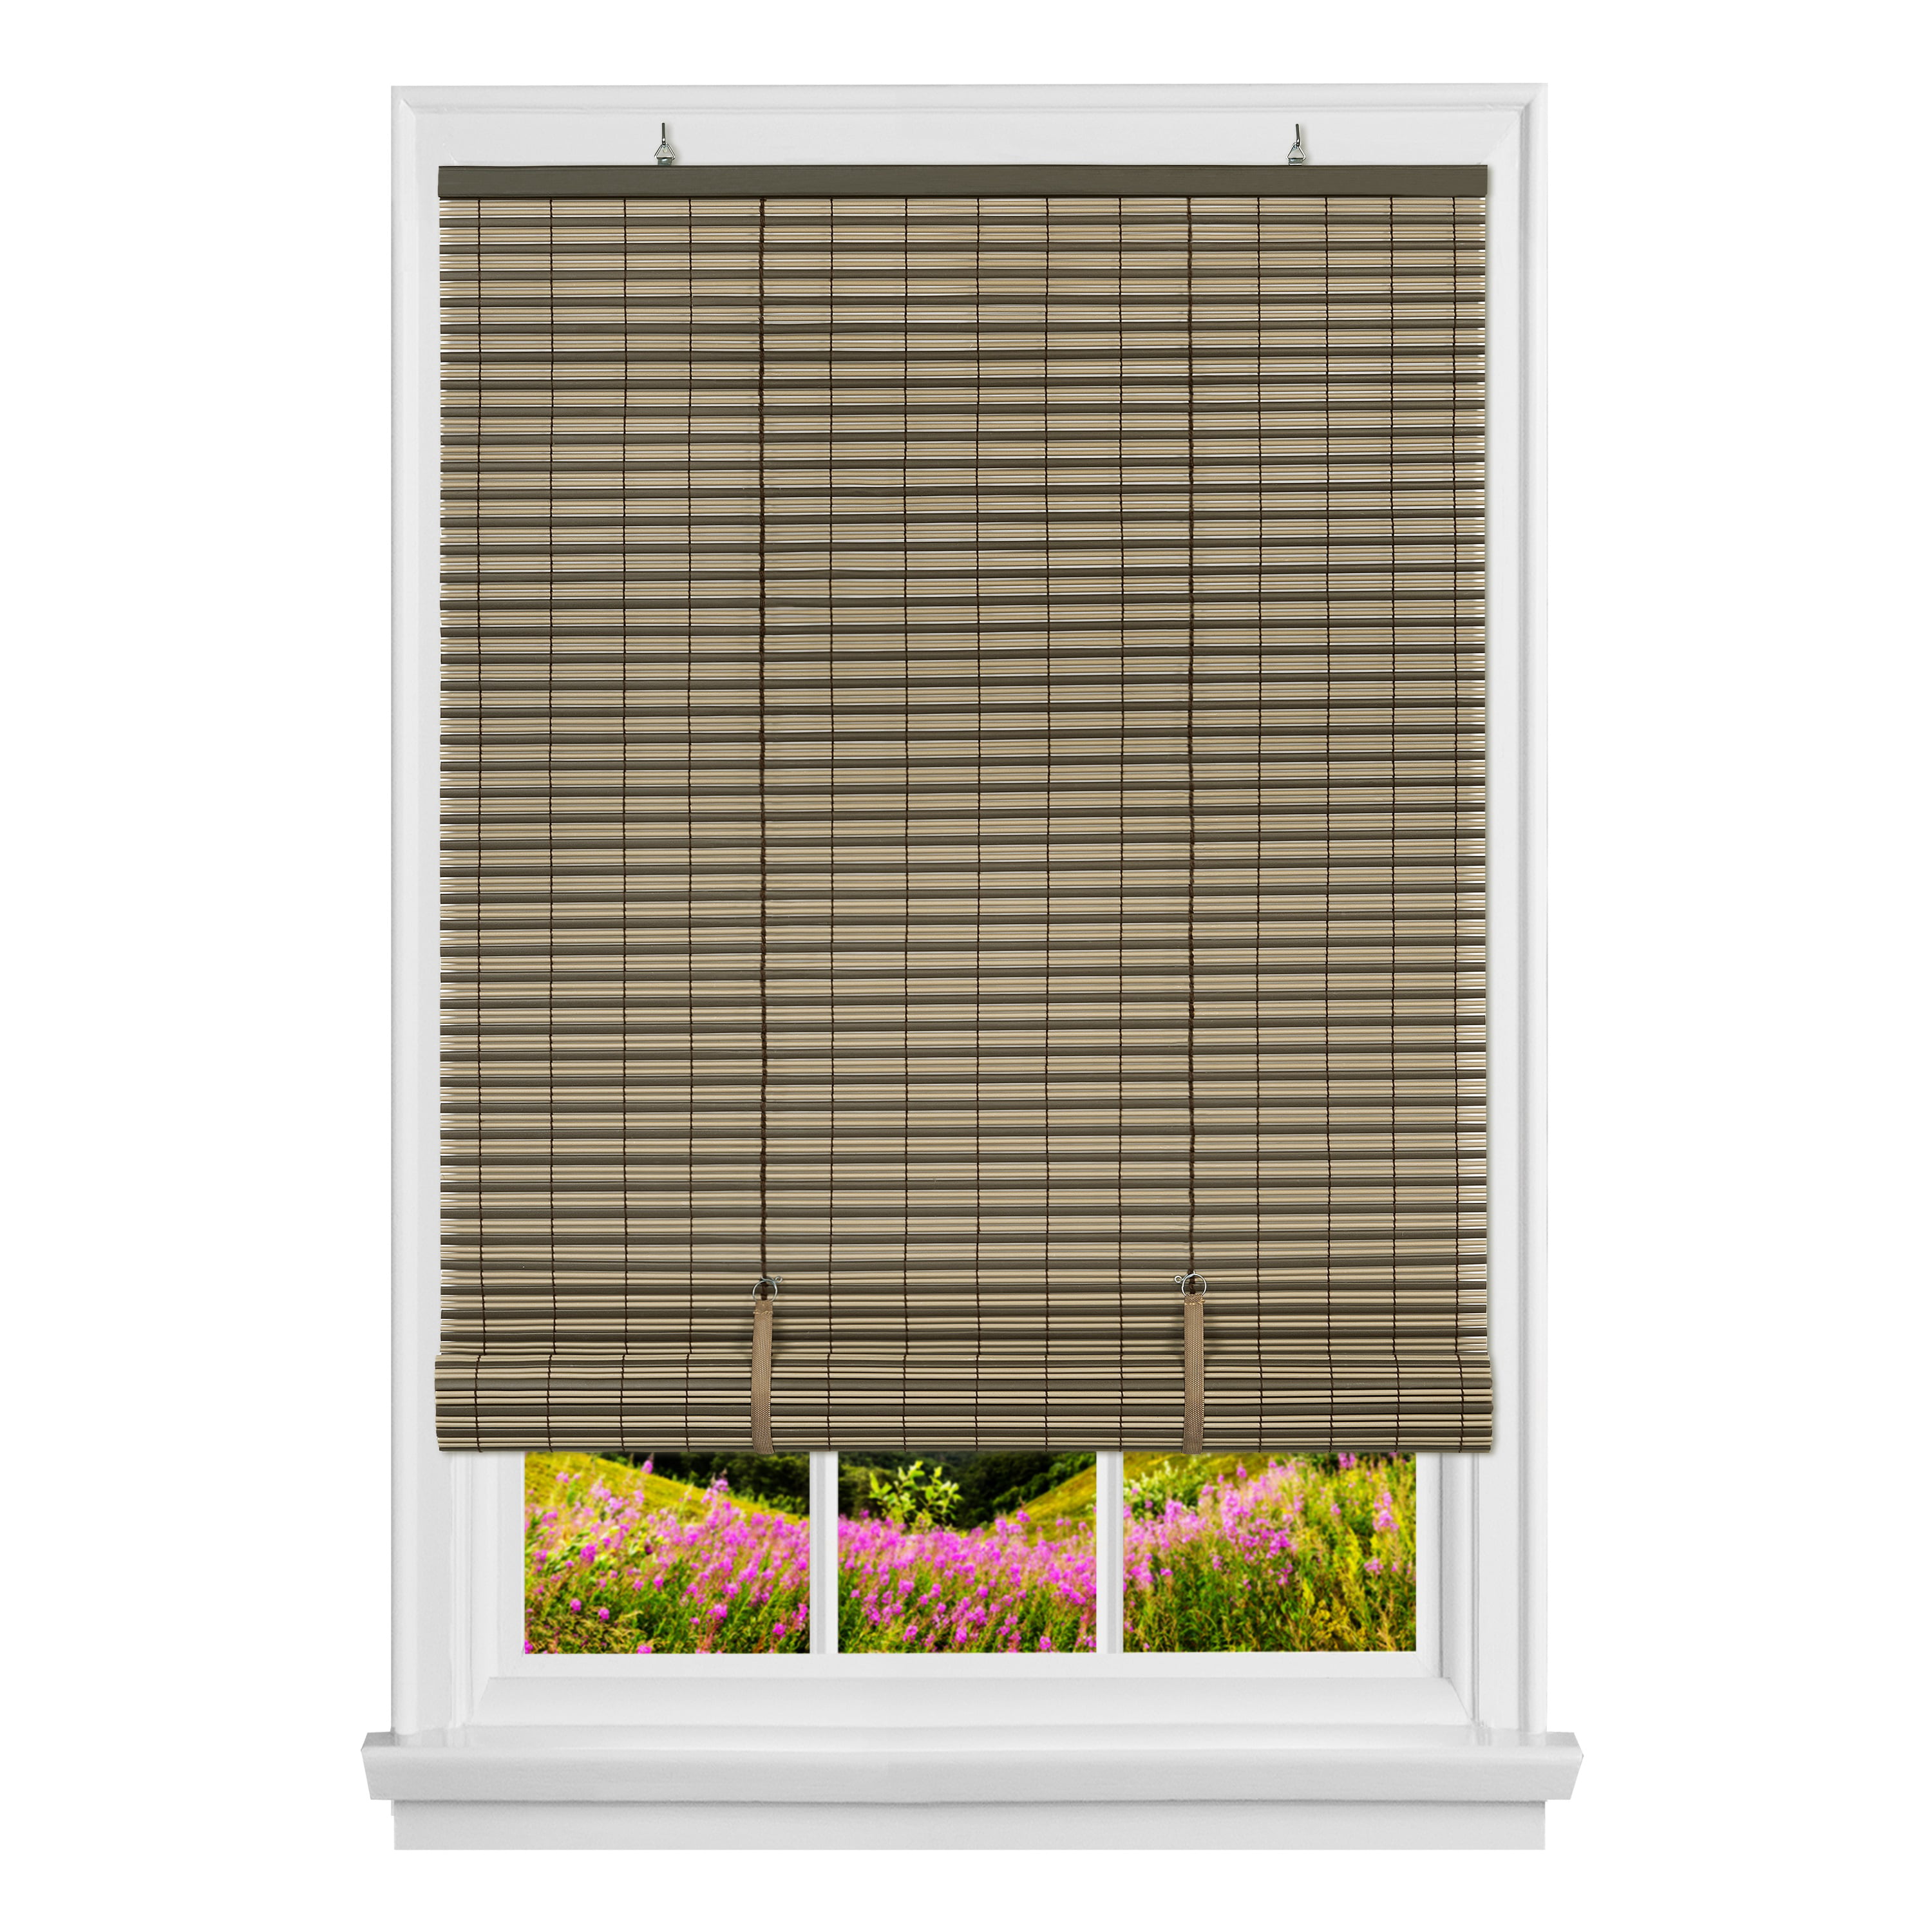 LIVE LIFE Eclipse Cordless Vinyl Roll-Up Blind 72x72 - Cocoa/Almond